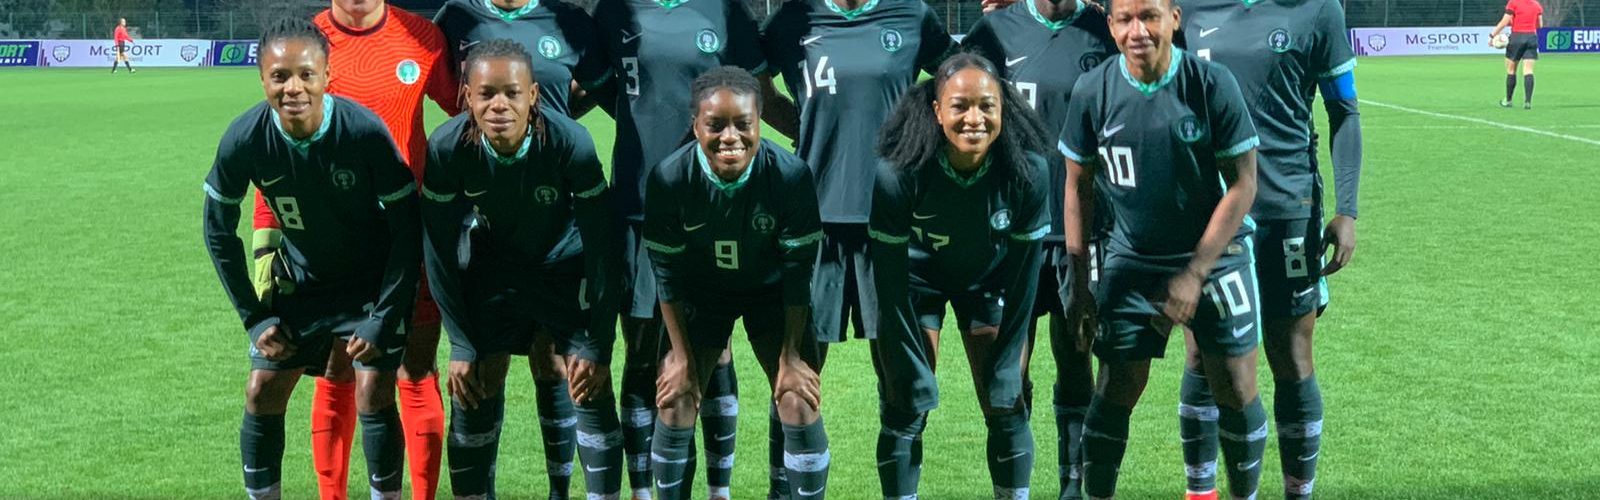 Summer Series: Super Falcons aim for victory against Portugal